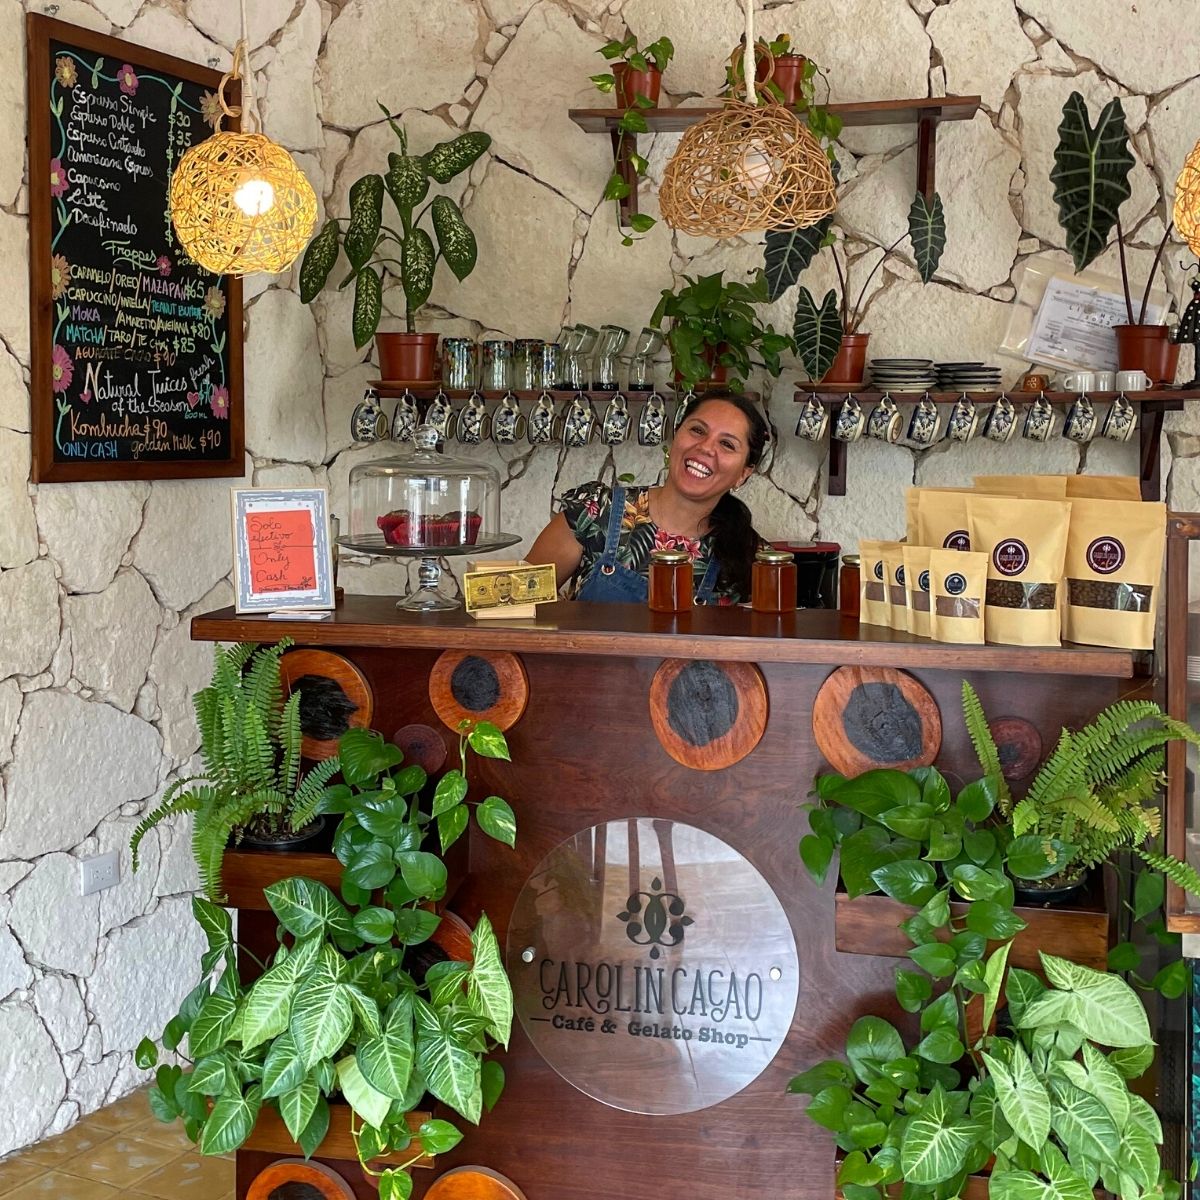 Travel-Tip-for-Plant-Lovers-Mexico-Valladolid-Carolin-Cacao-Cafe-Gelato-featured